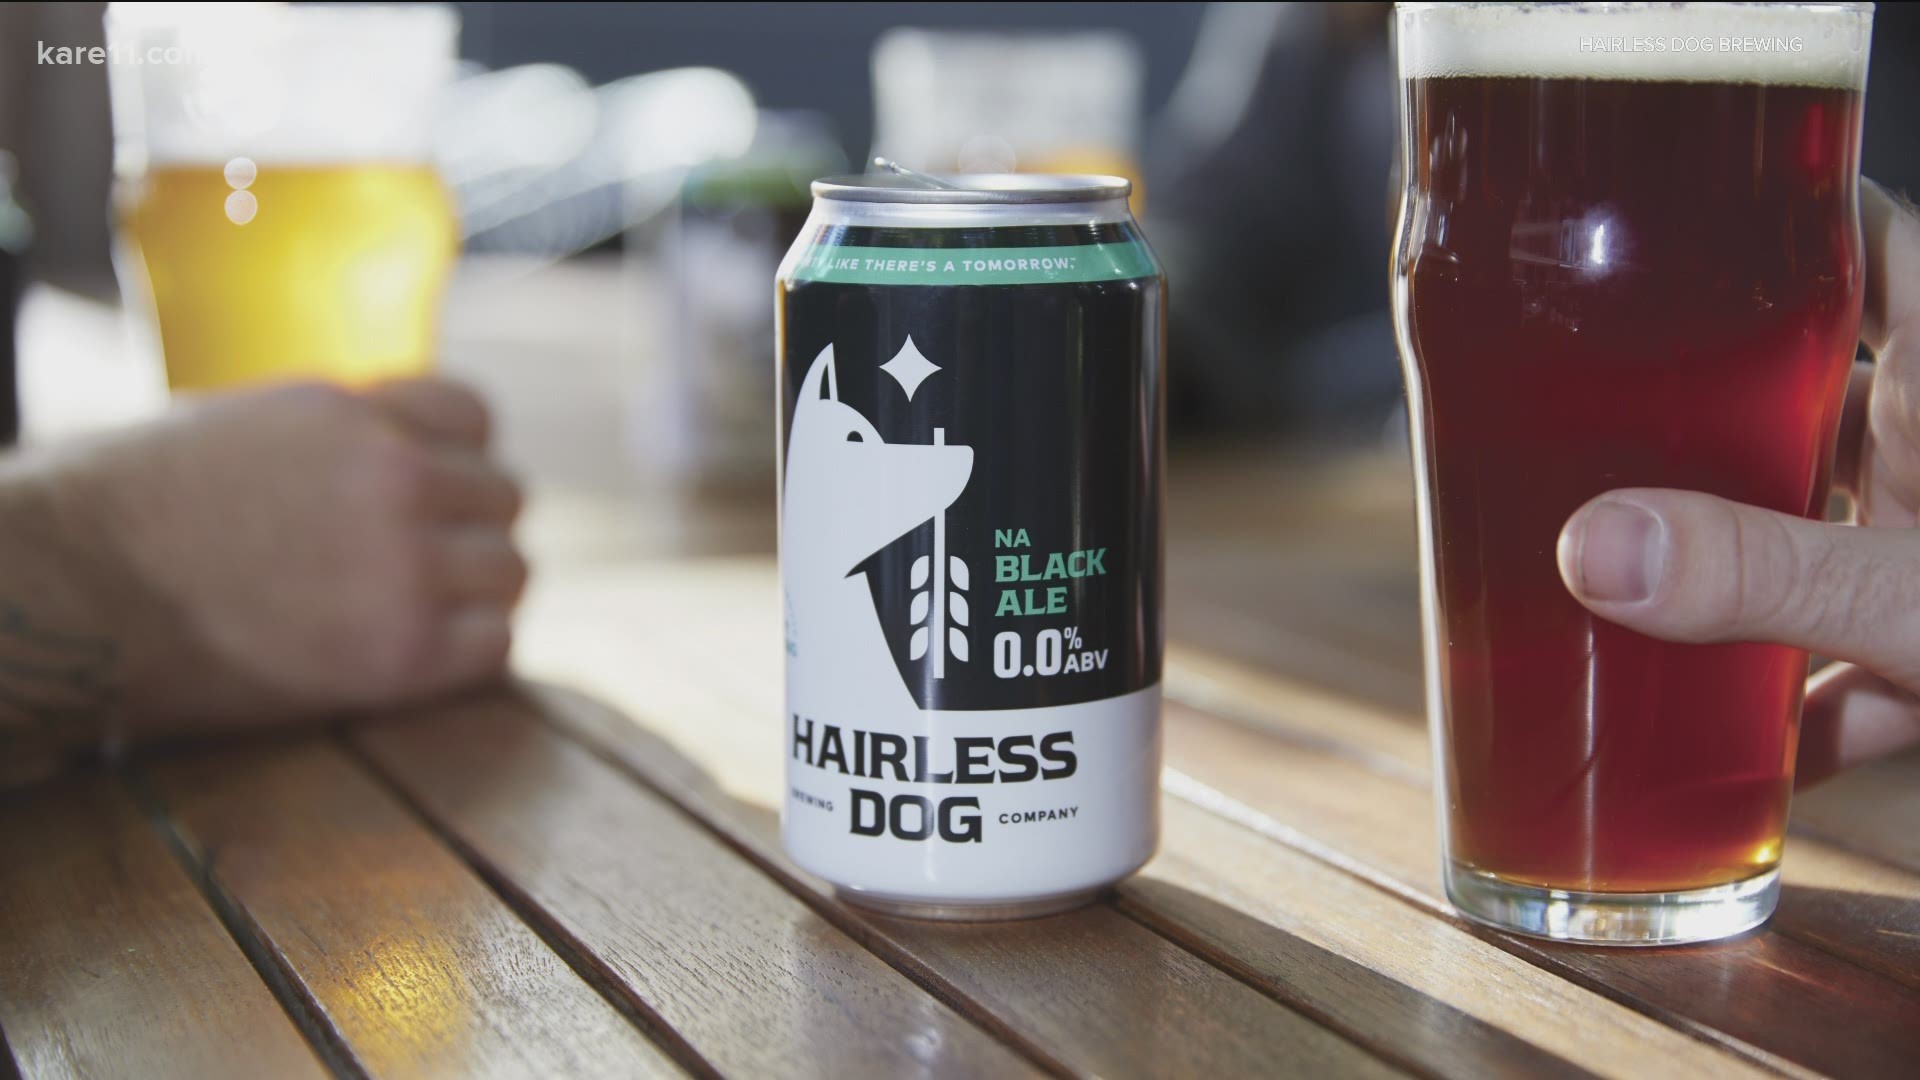 Hairless Dog is an American 0.0% ABV craft beer brand, with truly alcohol-free products. Alcohol is never in the brewing process.